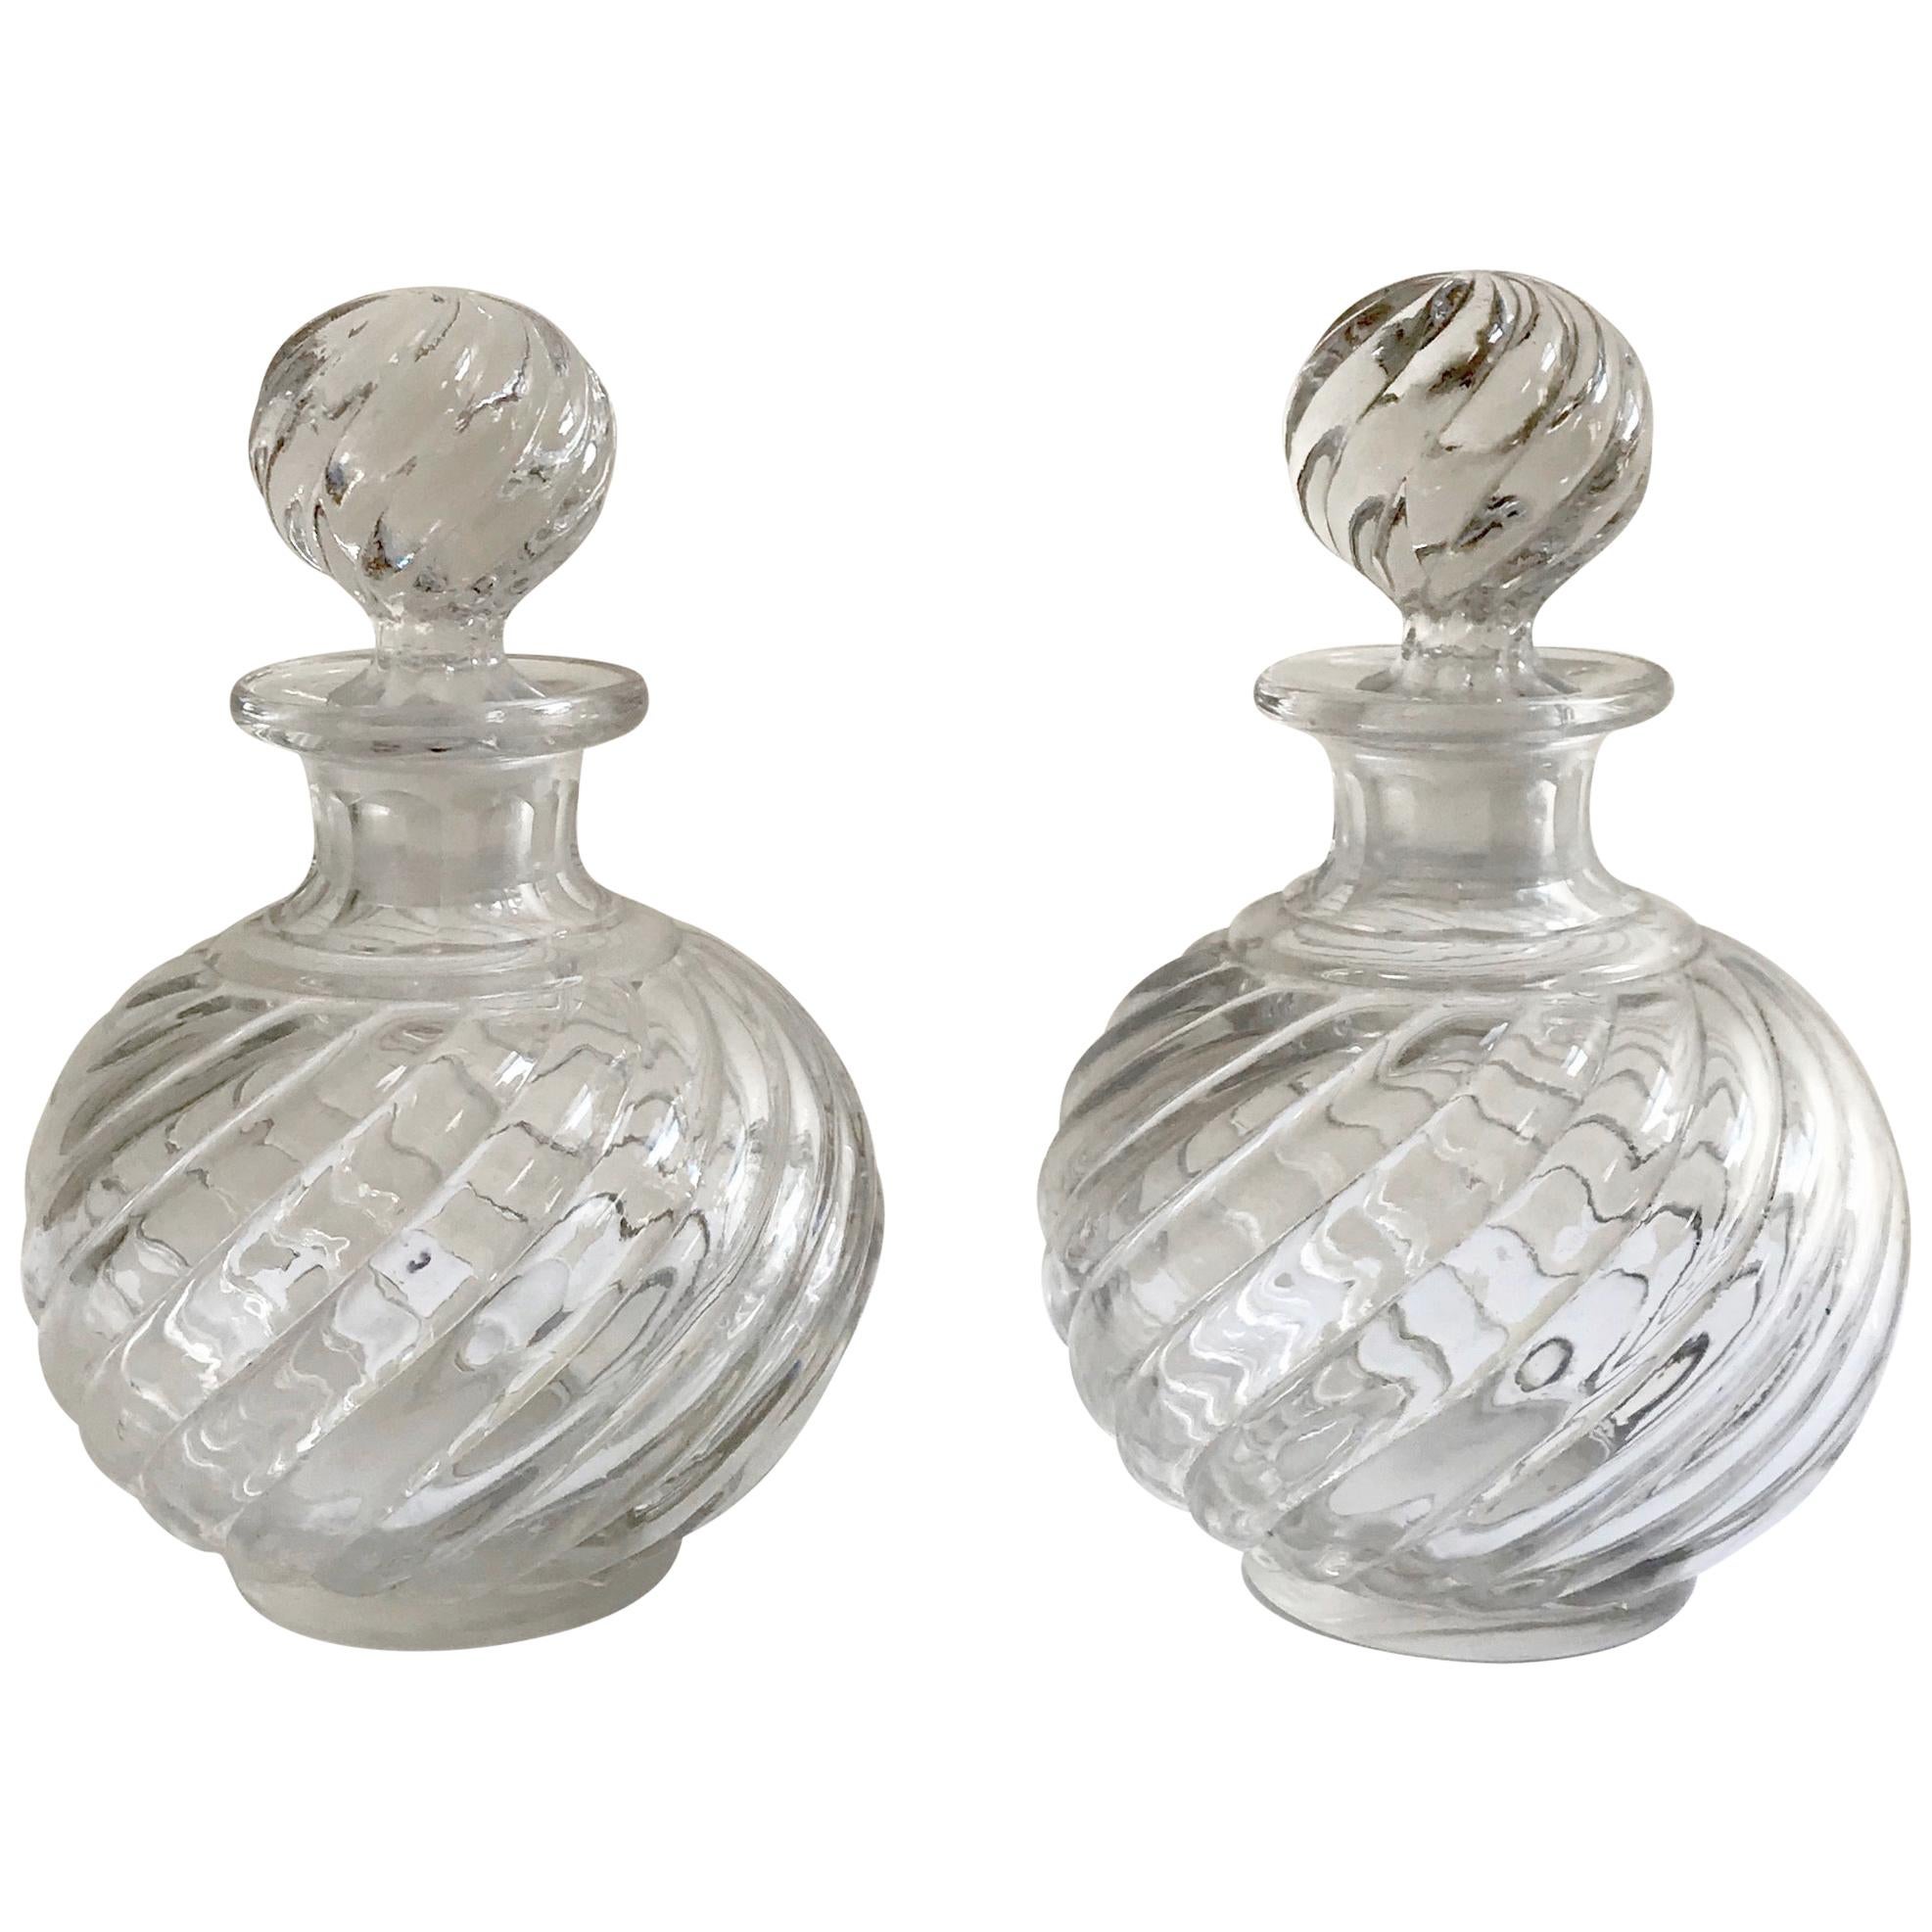 Antique Crystal Bamboo Swirl Perfume Bottles by Baccarat